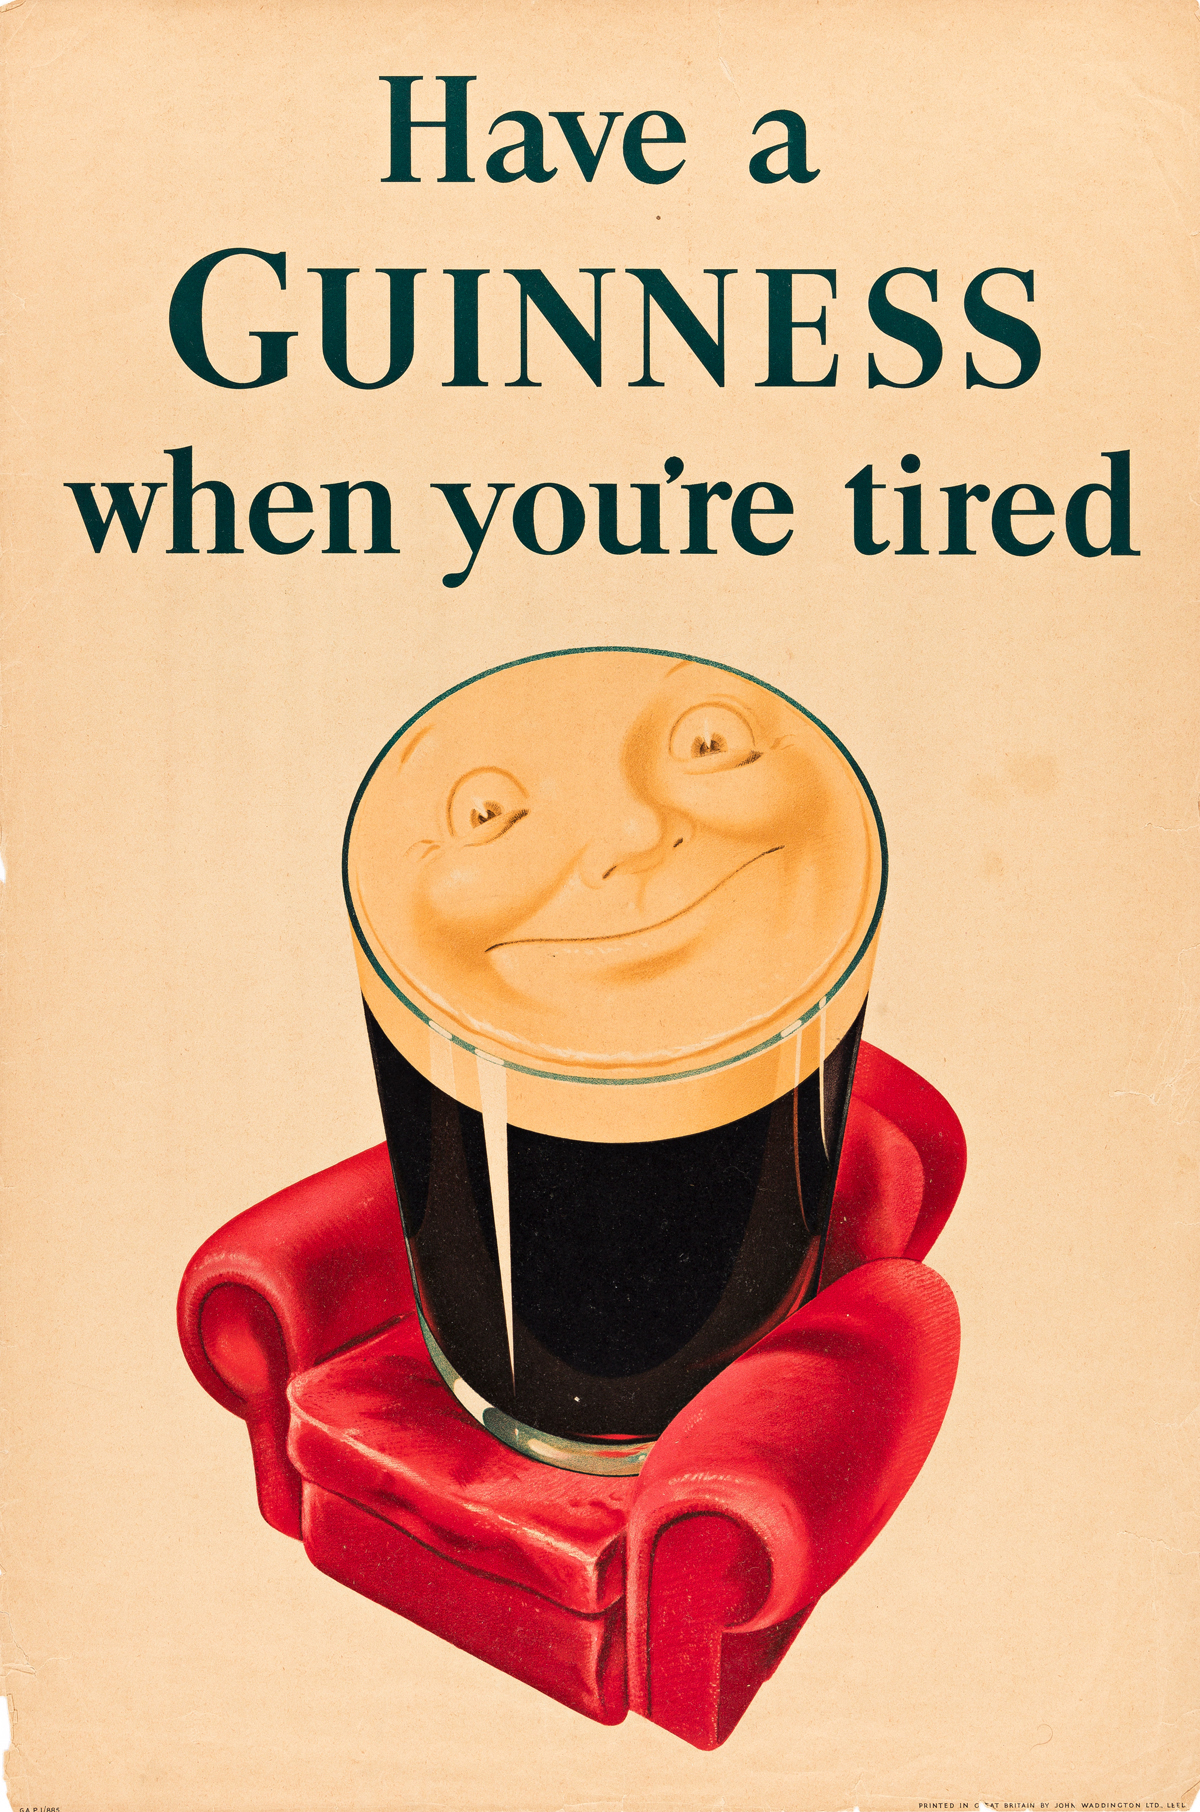 DESIGNER UNKNOWN.  HAVE A GUINNESS WHEN YOURE TIRED. Circa 1935. 30x20 inches, 76x50 cm. John Waddington, Ltd., Leeds.